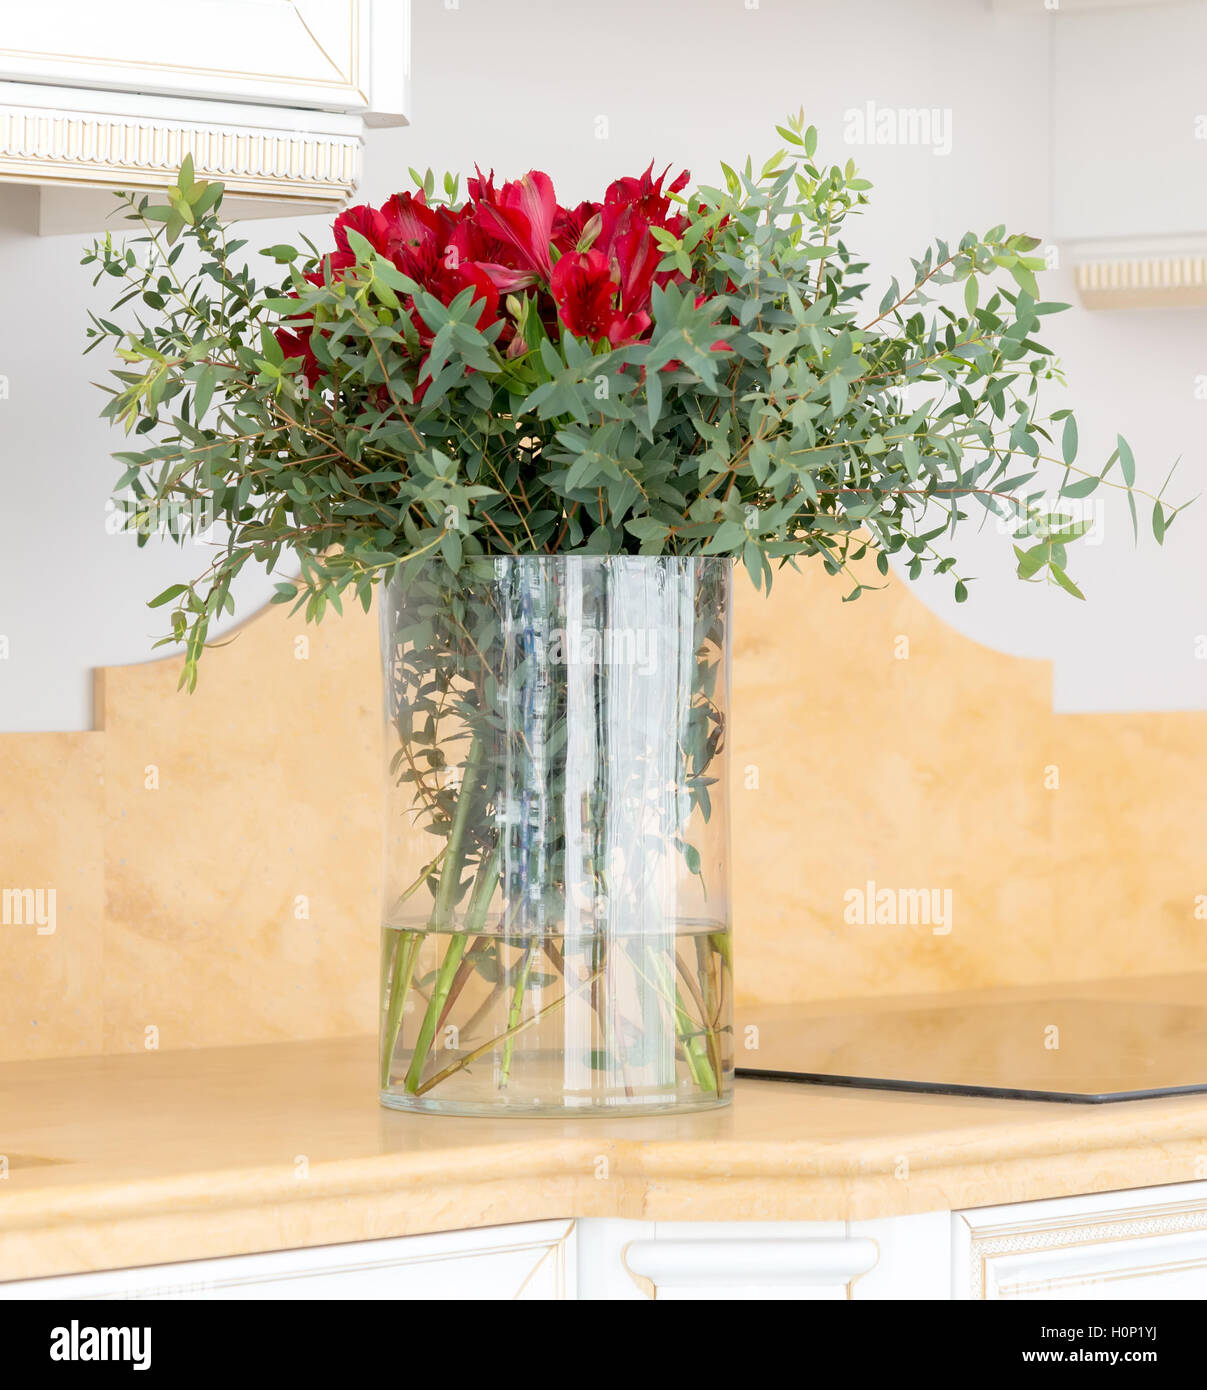 the beautiful flower arrangement in clear glass vase Stock Photo